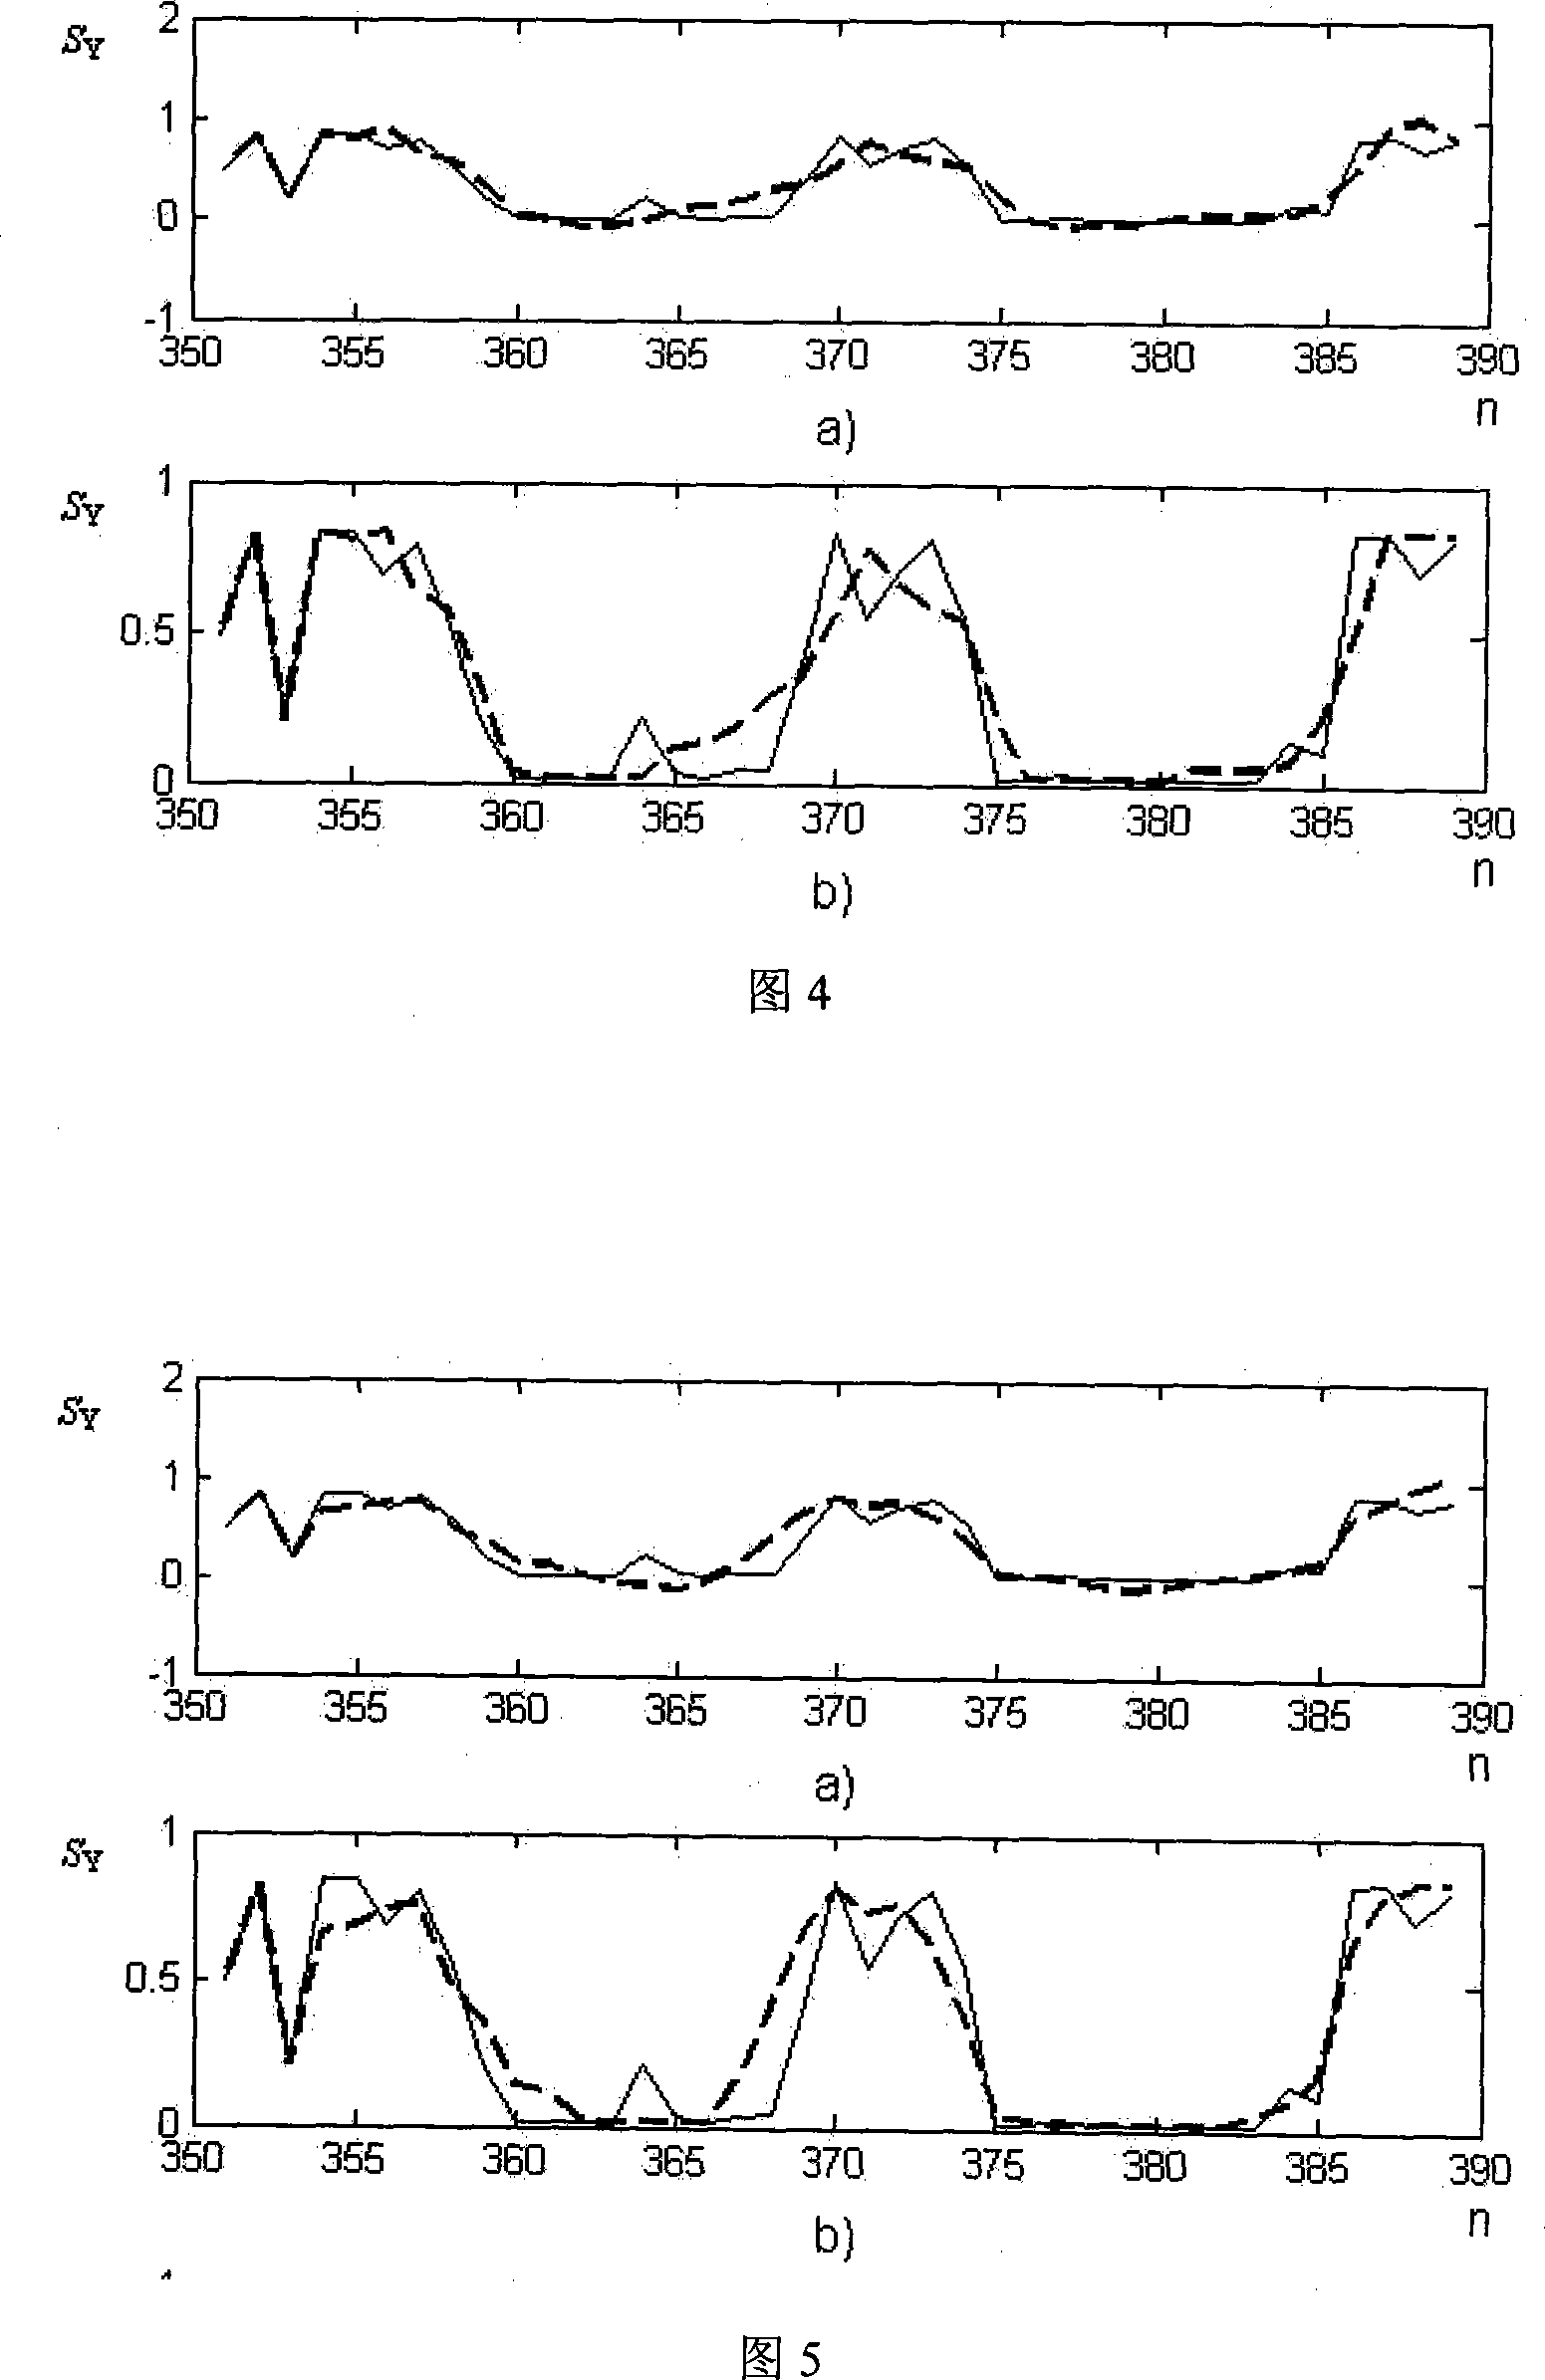 Electric spark process discharging state forecasting method